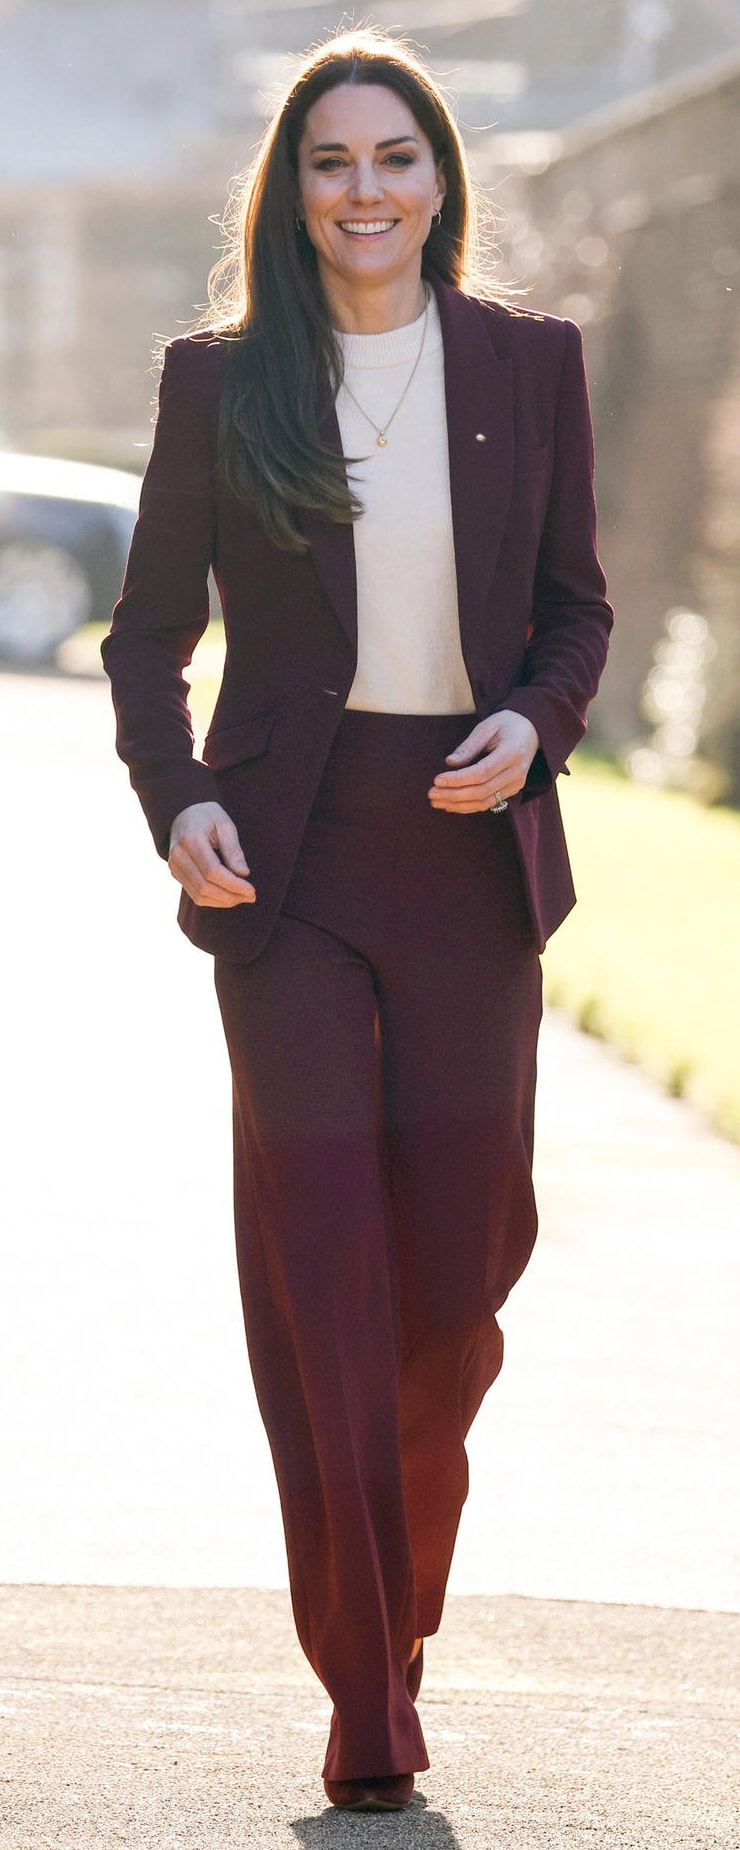 Roland Mouret Single-Breasted Stretch-Cady Blazer in Maroon - Kate Middleton  Outerwear - Kate's Closet